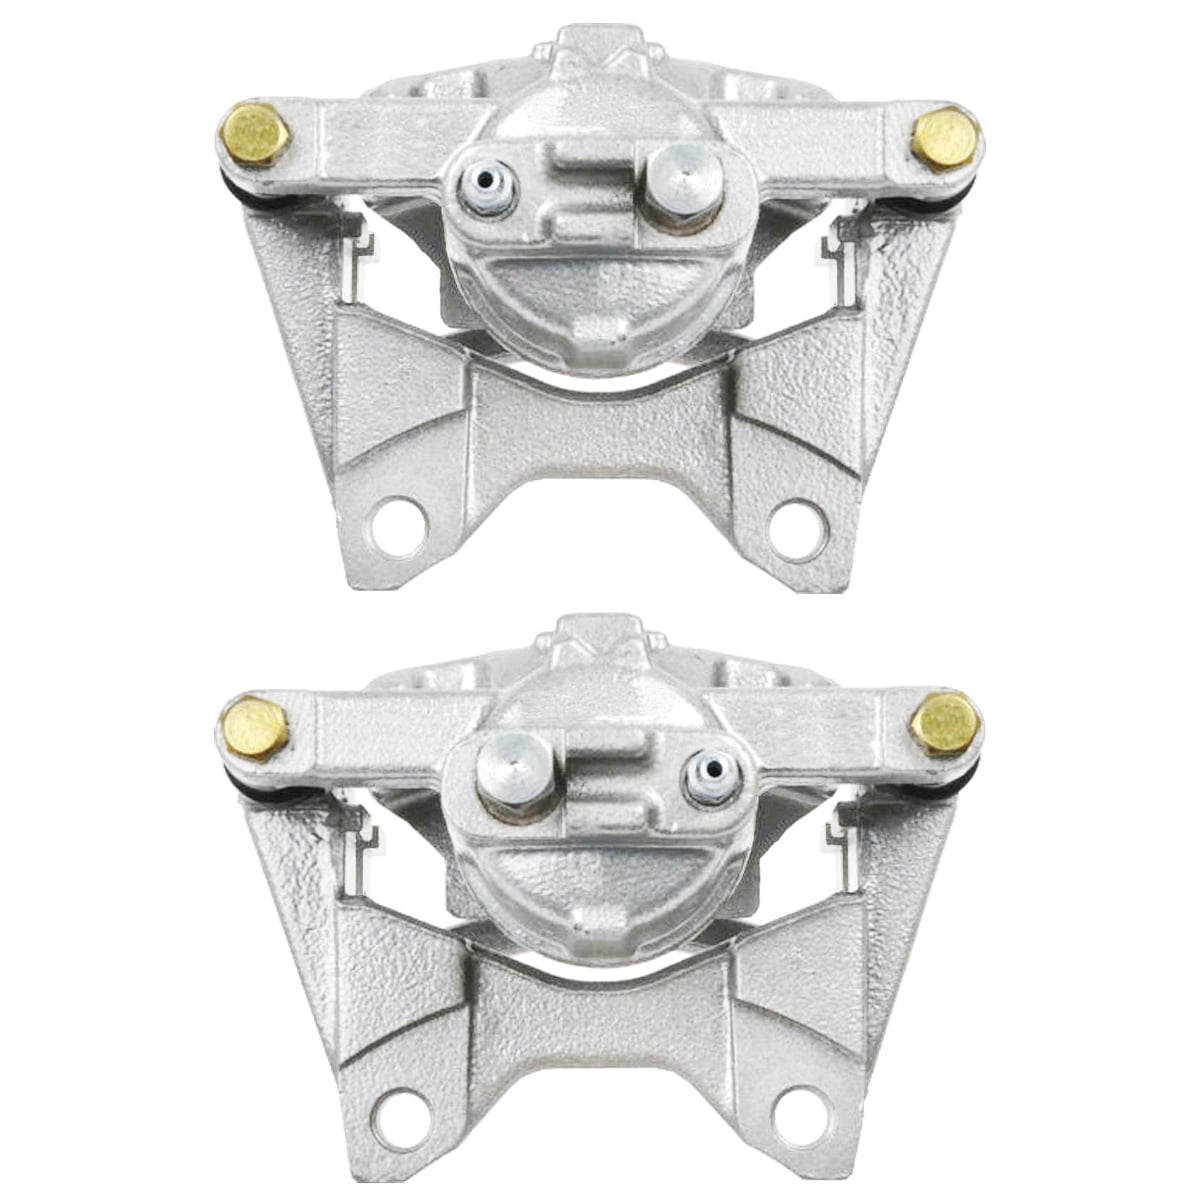 AutoShack Rear New Brake Calipers Assembly with Bracket Set of 2 Driver and  Passenger Side Replacement for 2007-2017 Jeep Wrangler 2008-2012 Liberty  2018 Wrangler JK 2007-2011 Dodge Nitro  4WD RWD 